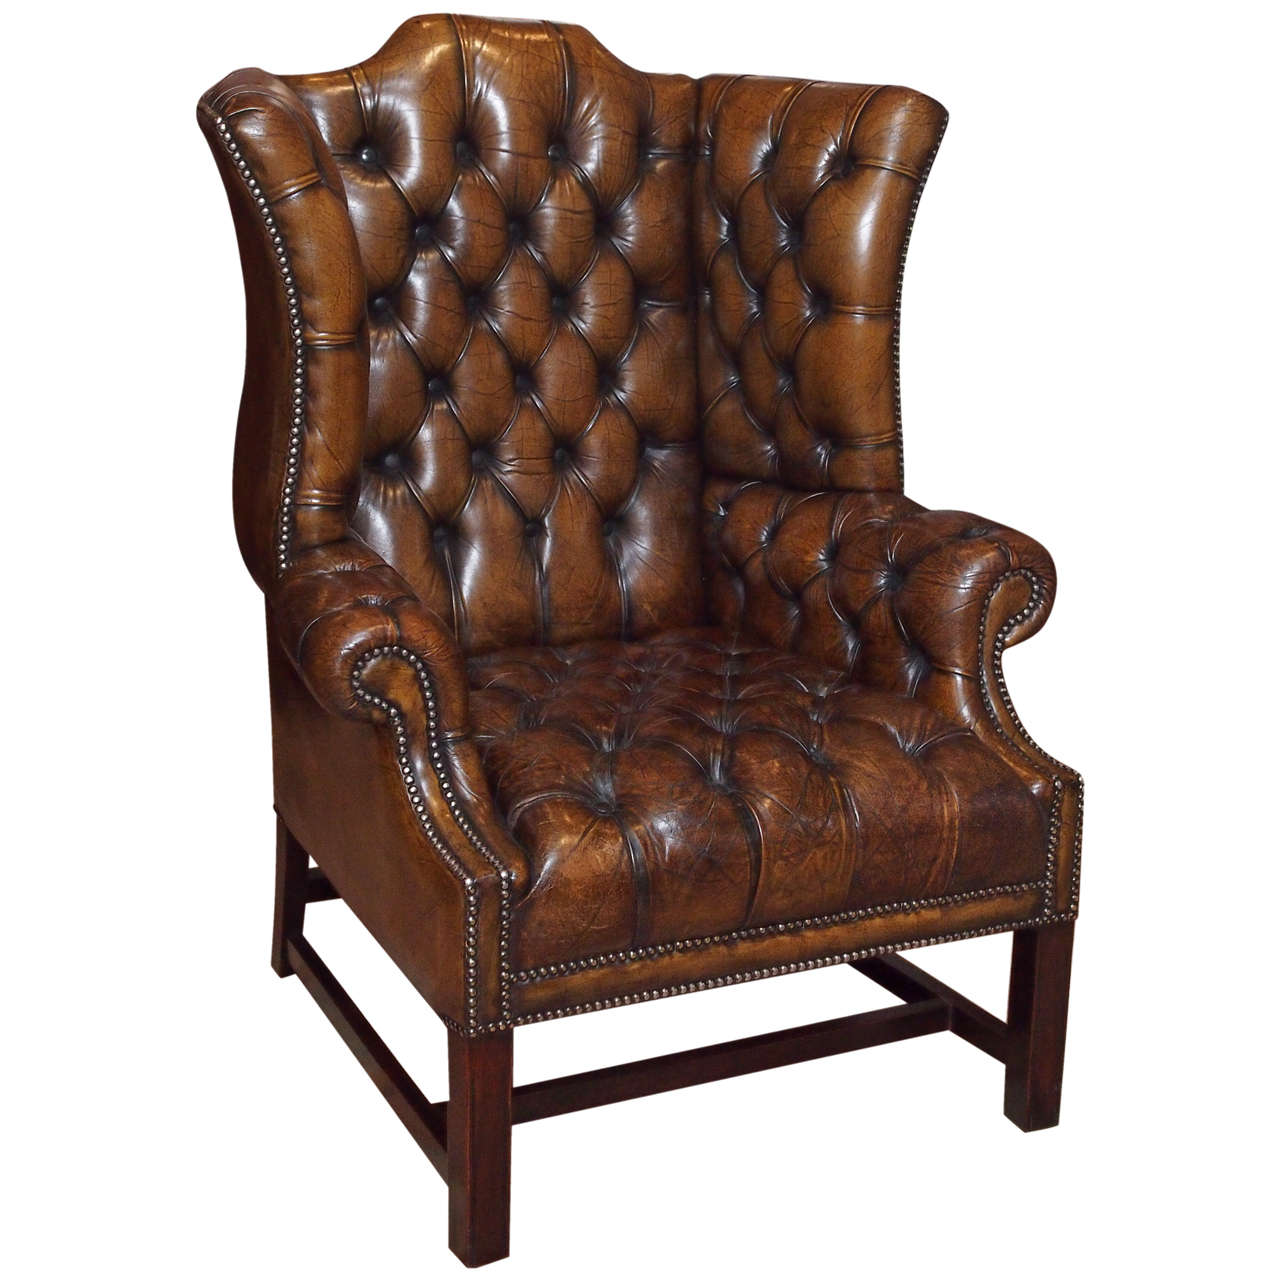 Antique English brown leather wing chair.